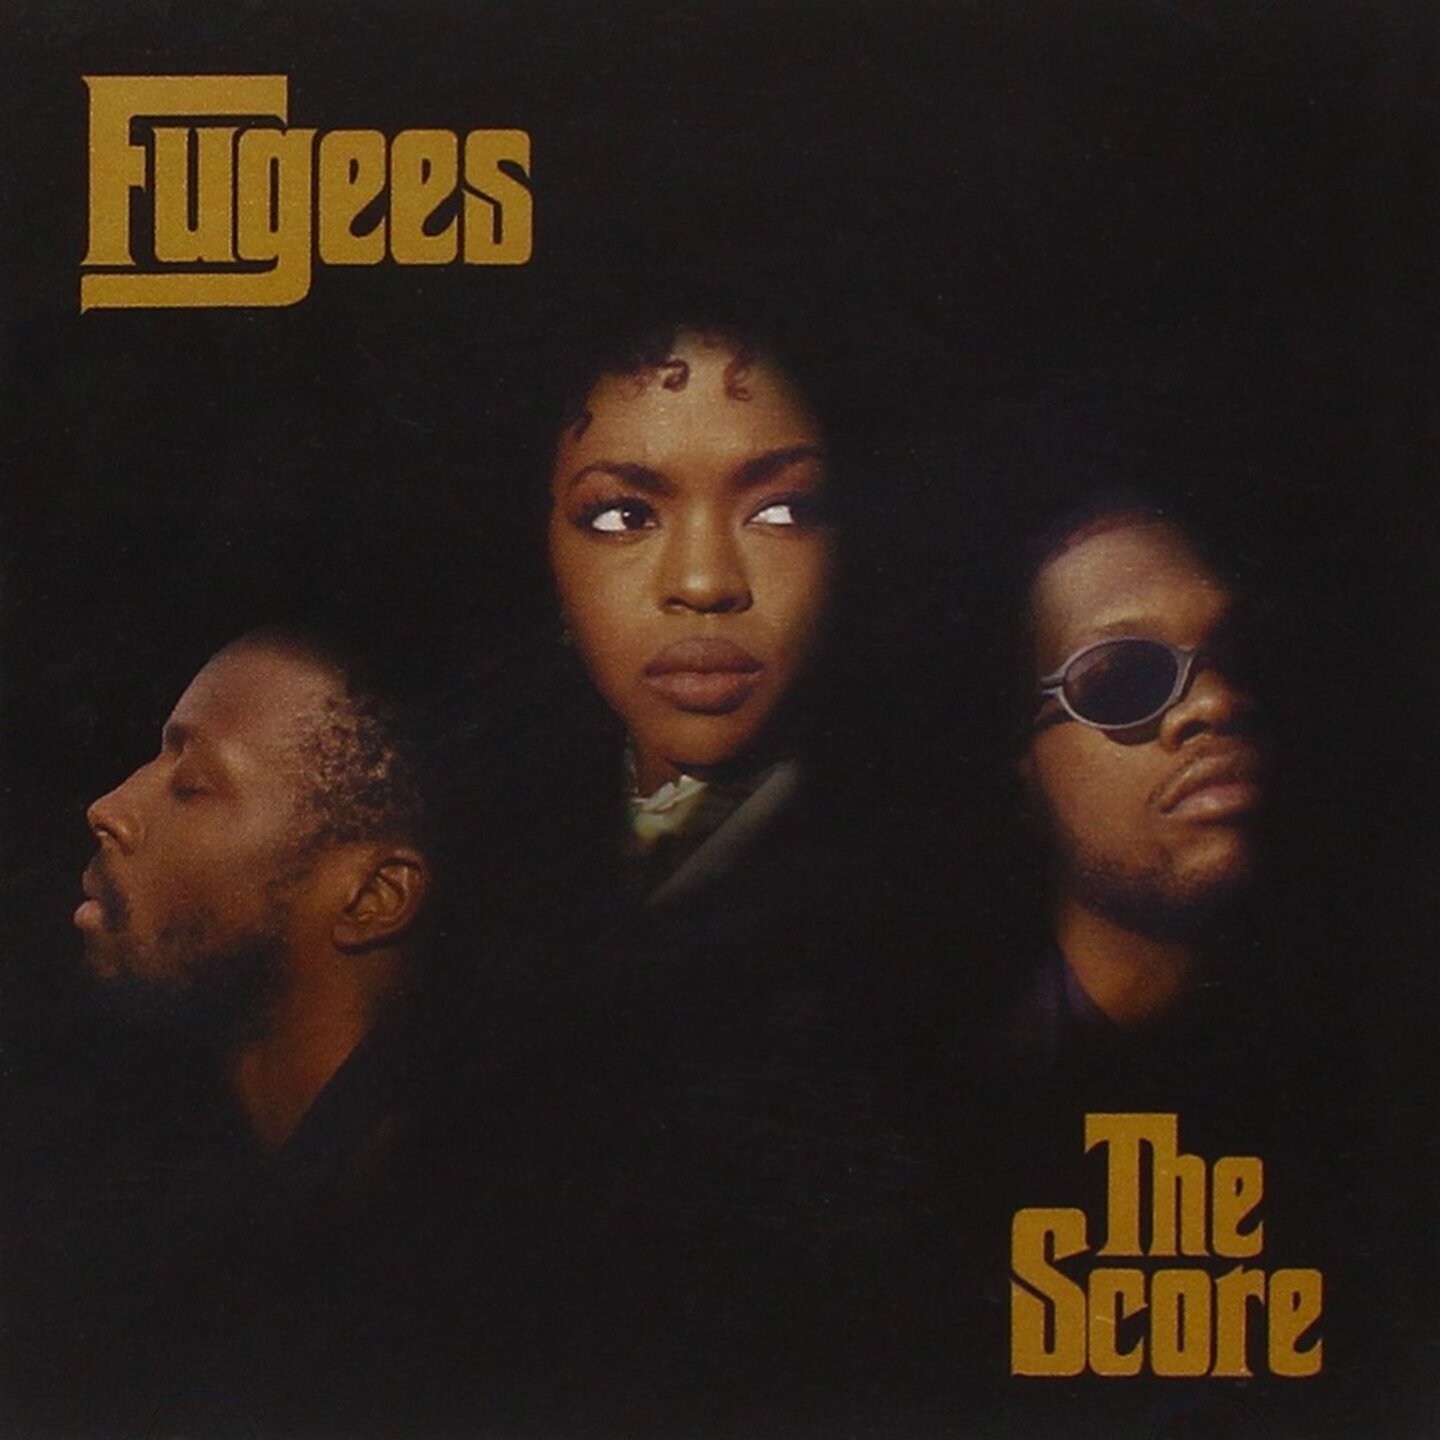 FUGEES, THE - The Score 2xLP